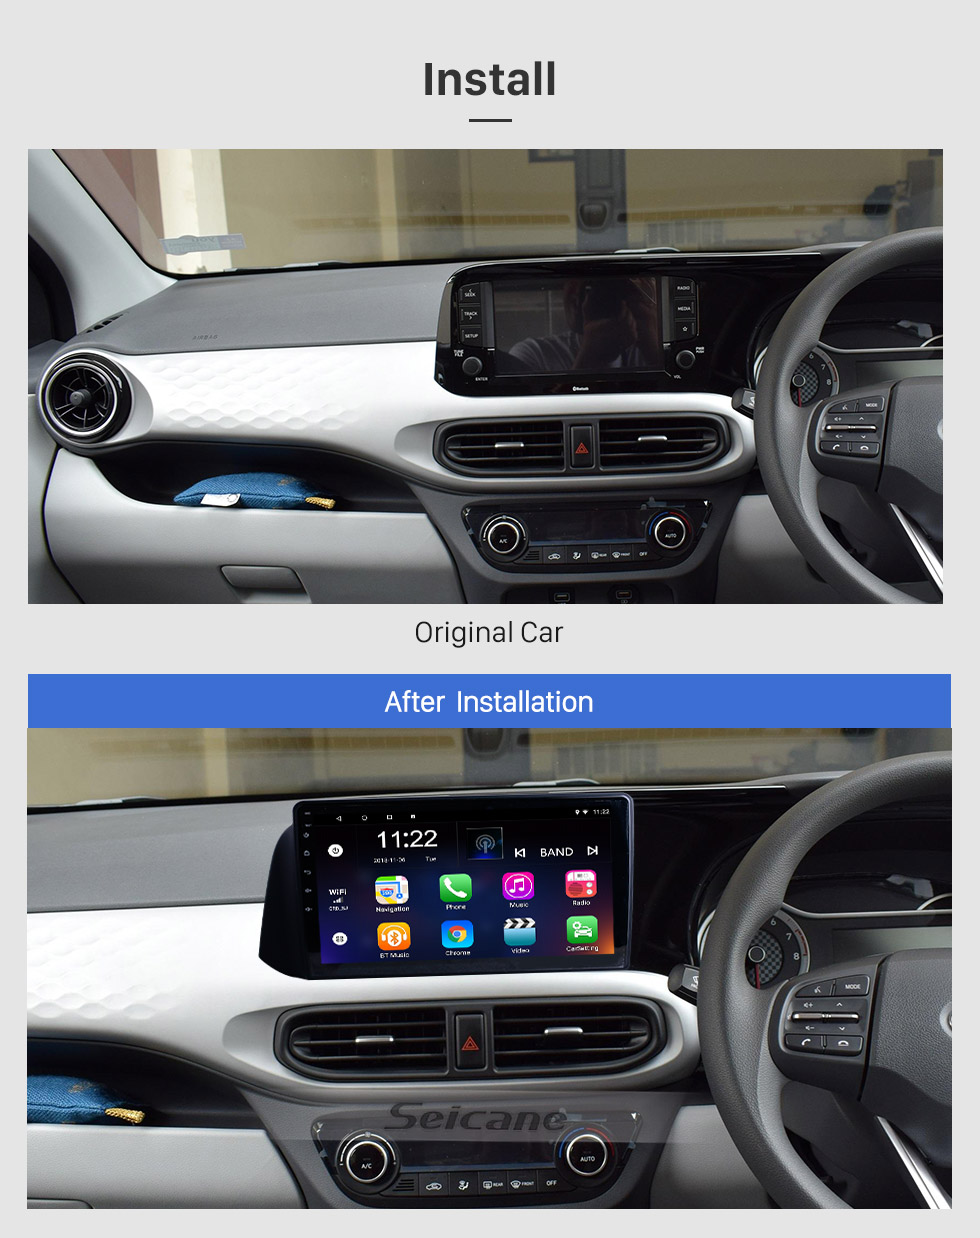 Seicane Android 10.0 10.1 inch for 2019 Hyundai i10 RHD Radio HD Touchscreen GPS Navigation System with Bluetooth support Carplay DVR